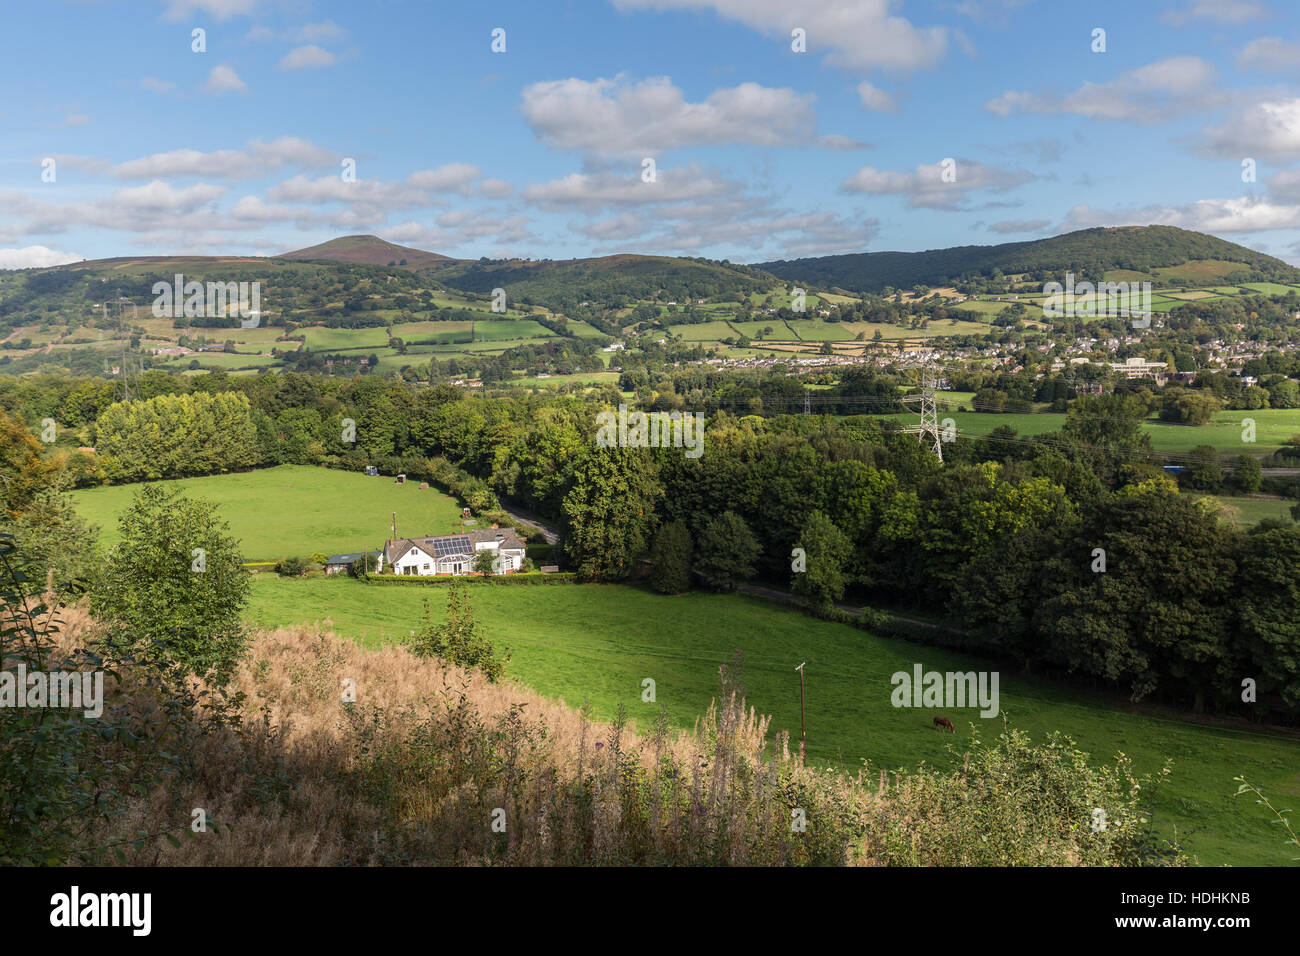 House with solar panels in rural setting with Sugar Loaf mountain in distance near Abergavenny, Wales, UK Stock Photo